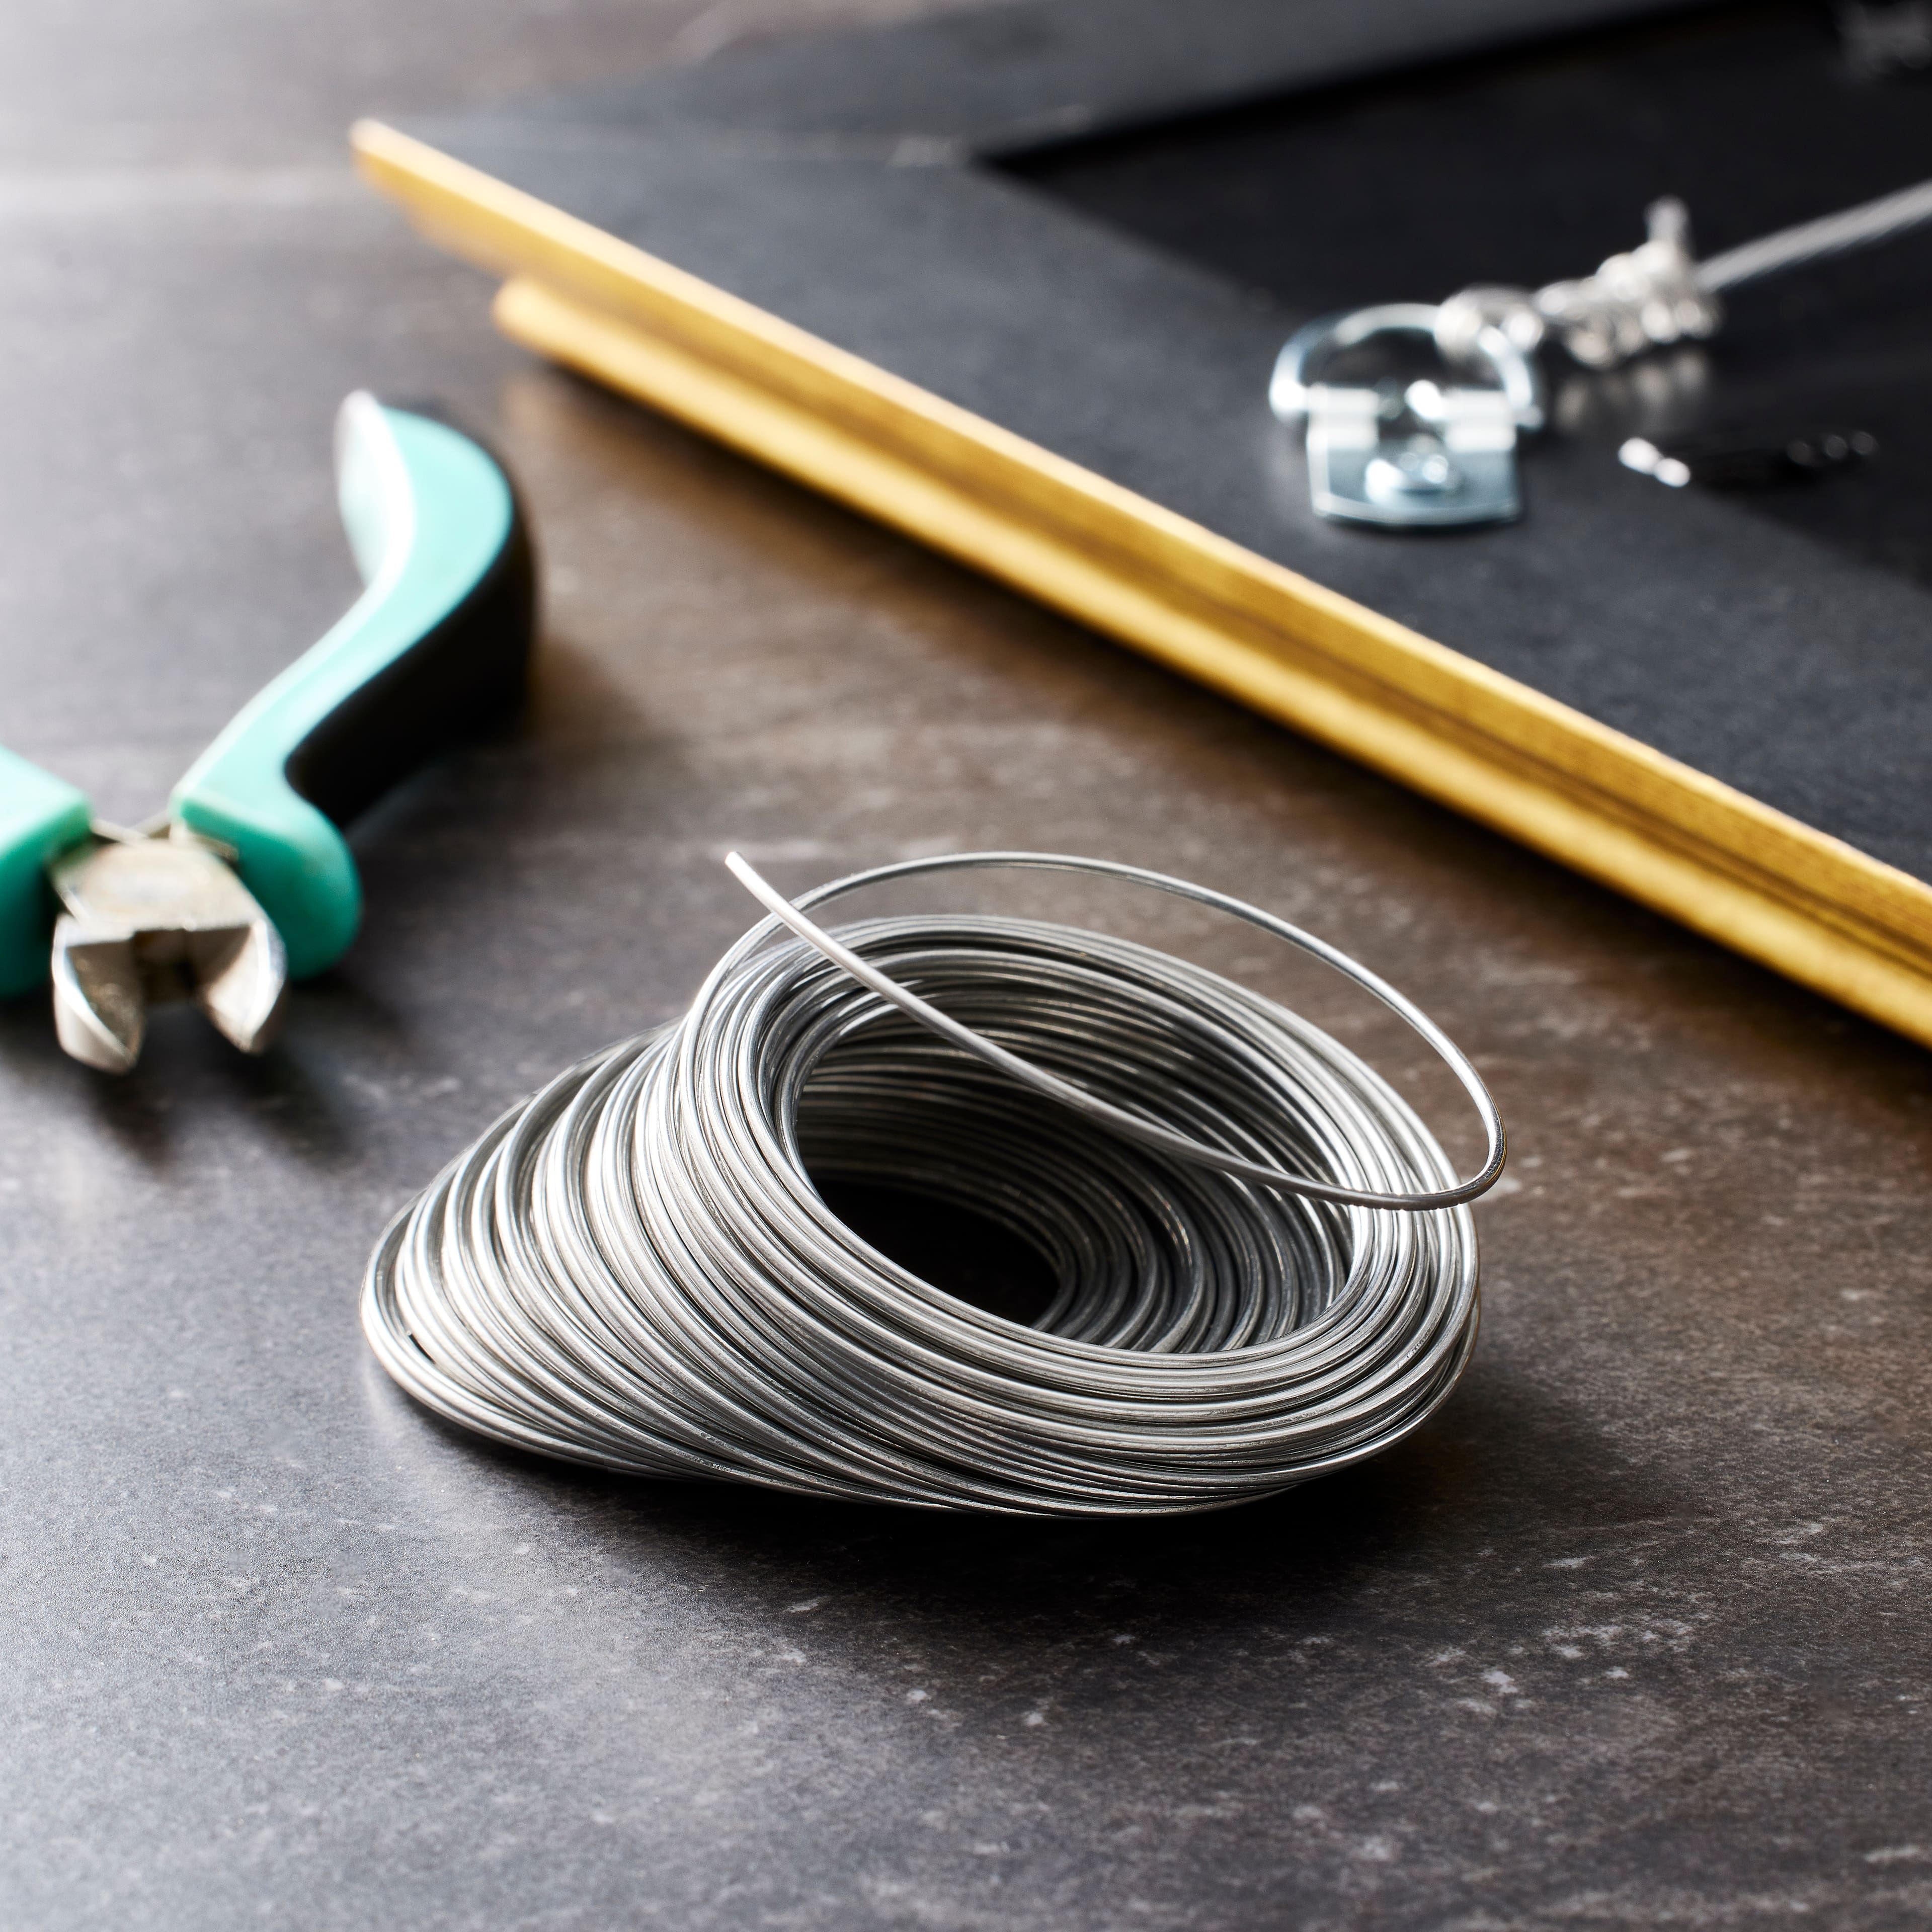 Shop for the Aluminum Hobby Wire at Michaels